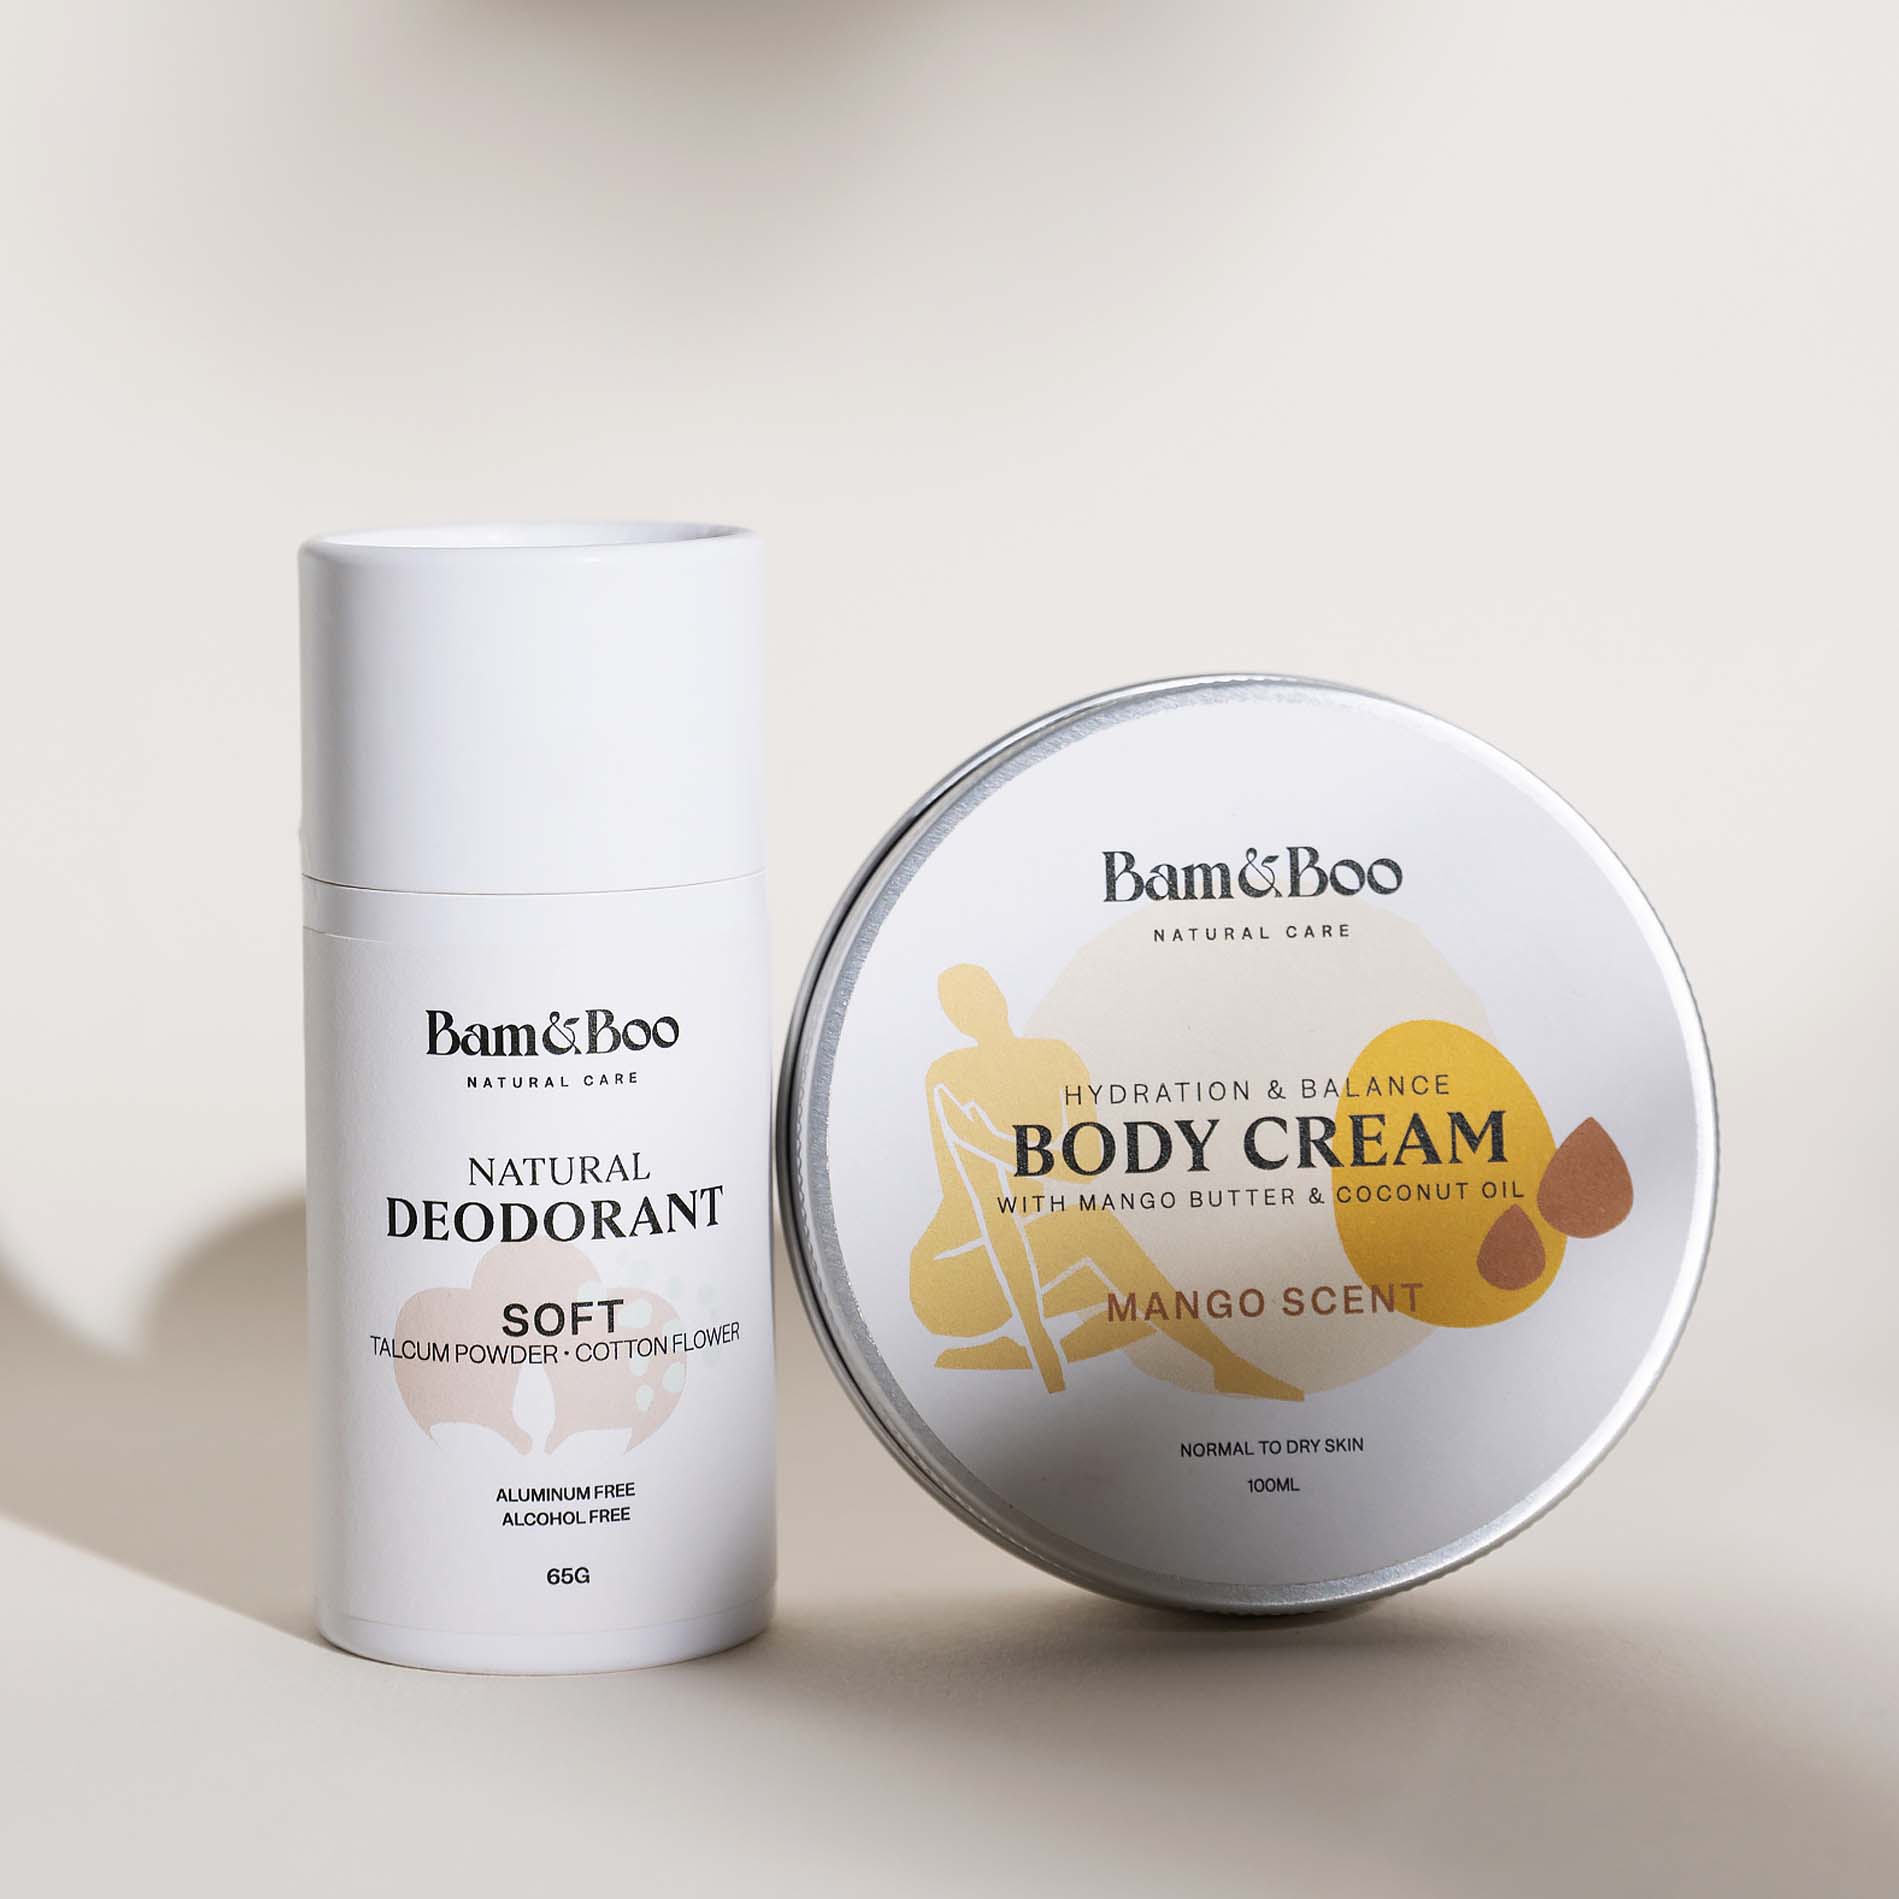 KIT | Bodilicious - Natural Deodorant & Body Cream - Bam&Boo - Eco-friendly, vegan, sustainable oral and personal care